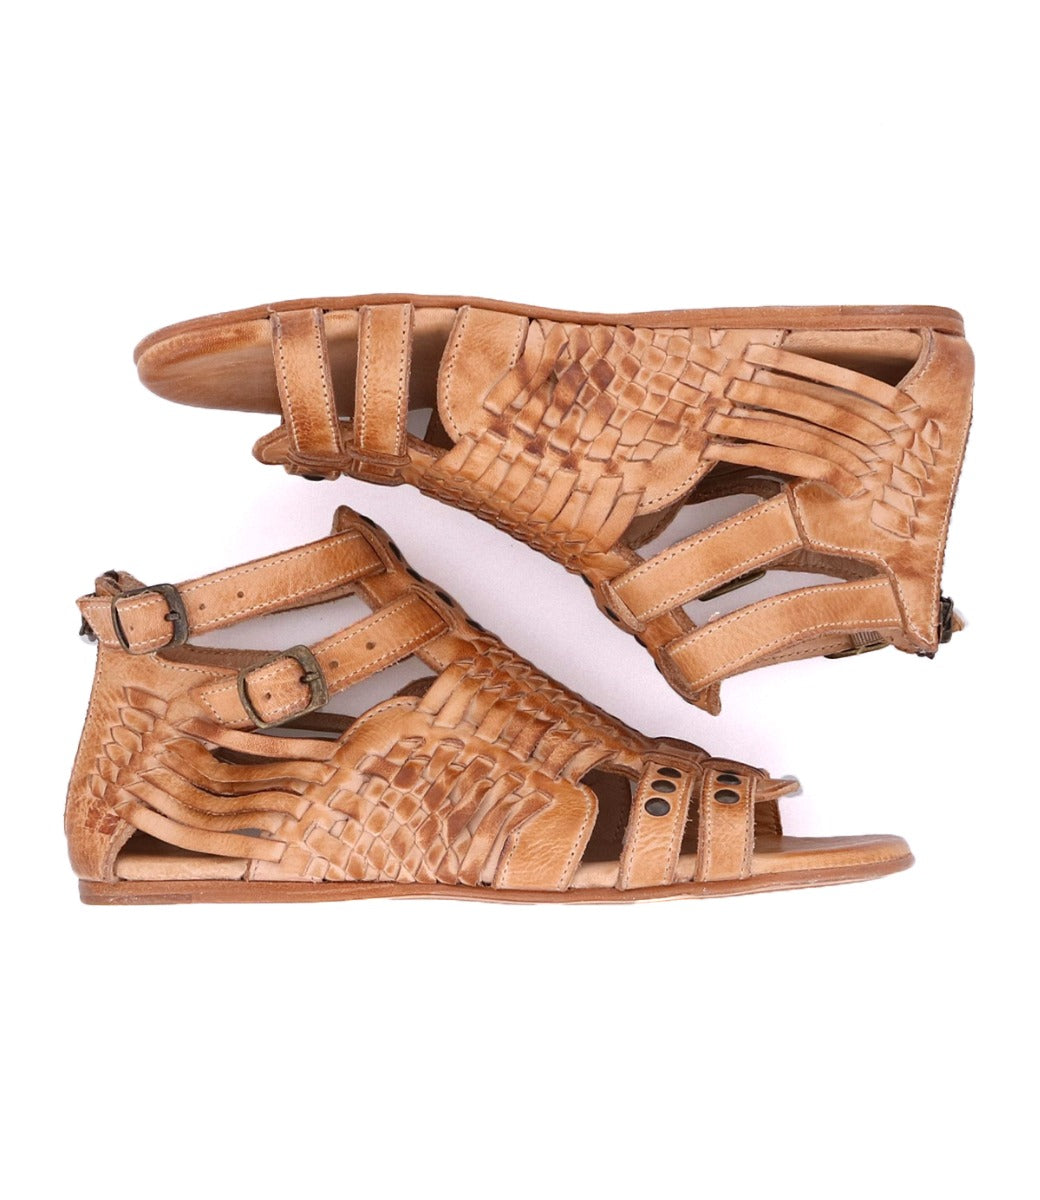 A pair of Bed Stu tan sandals with braided straps named Claire III.